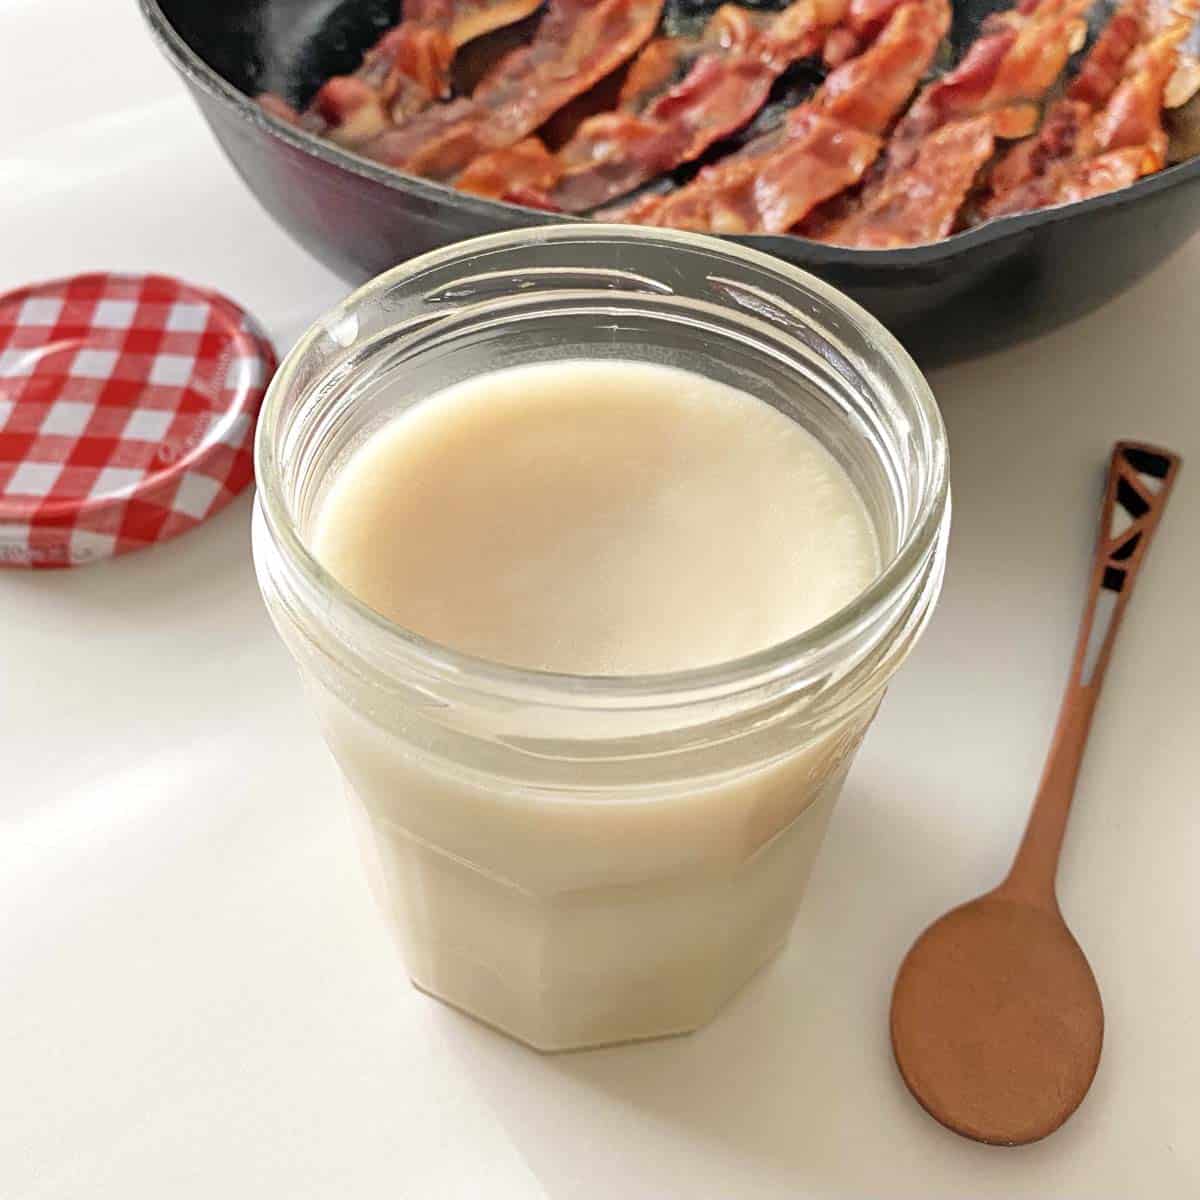 Bacon Lovers, You Need This Cute Bacon Grease Container